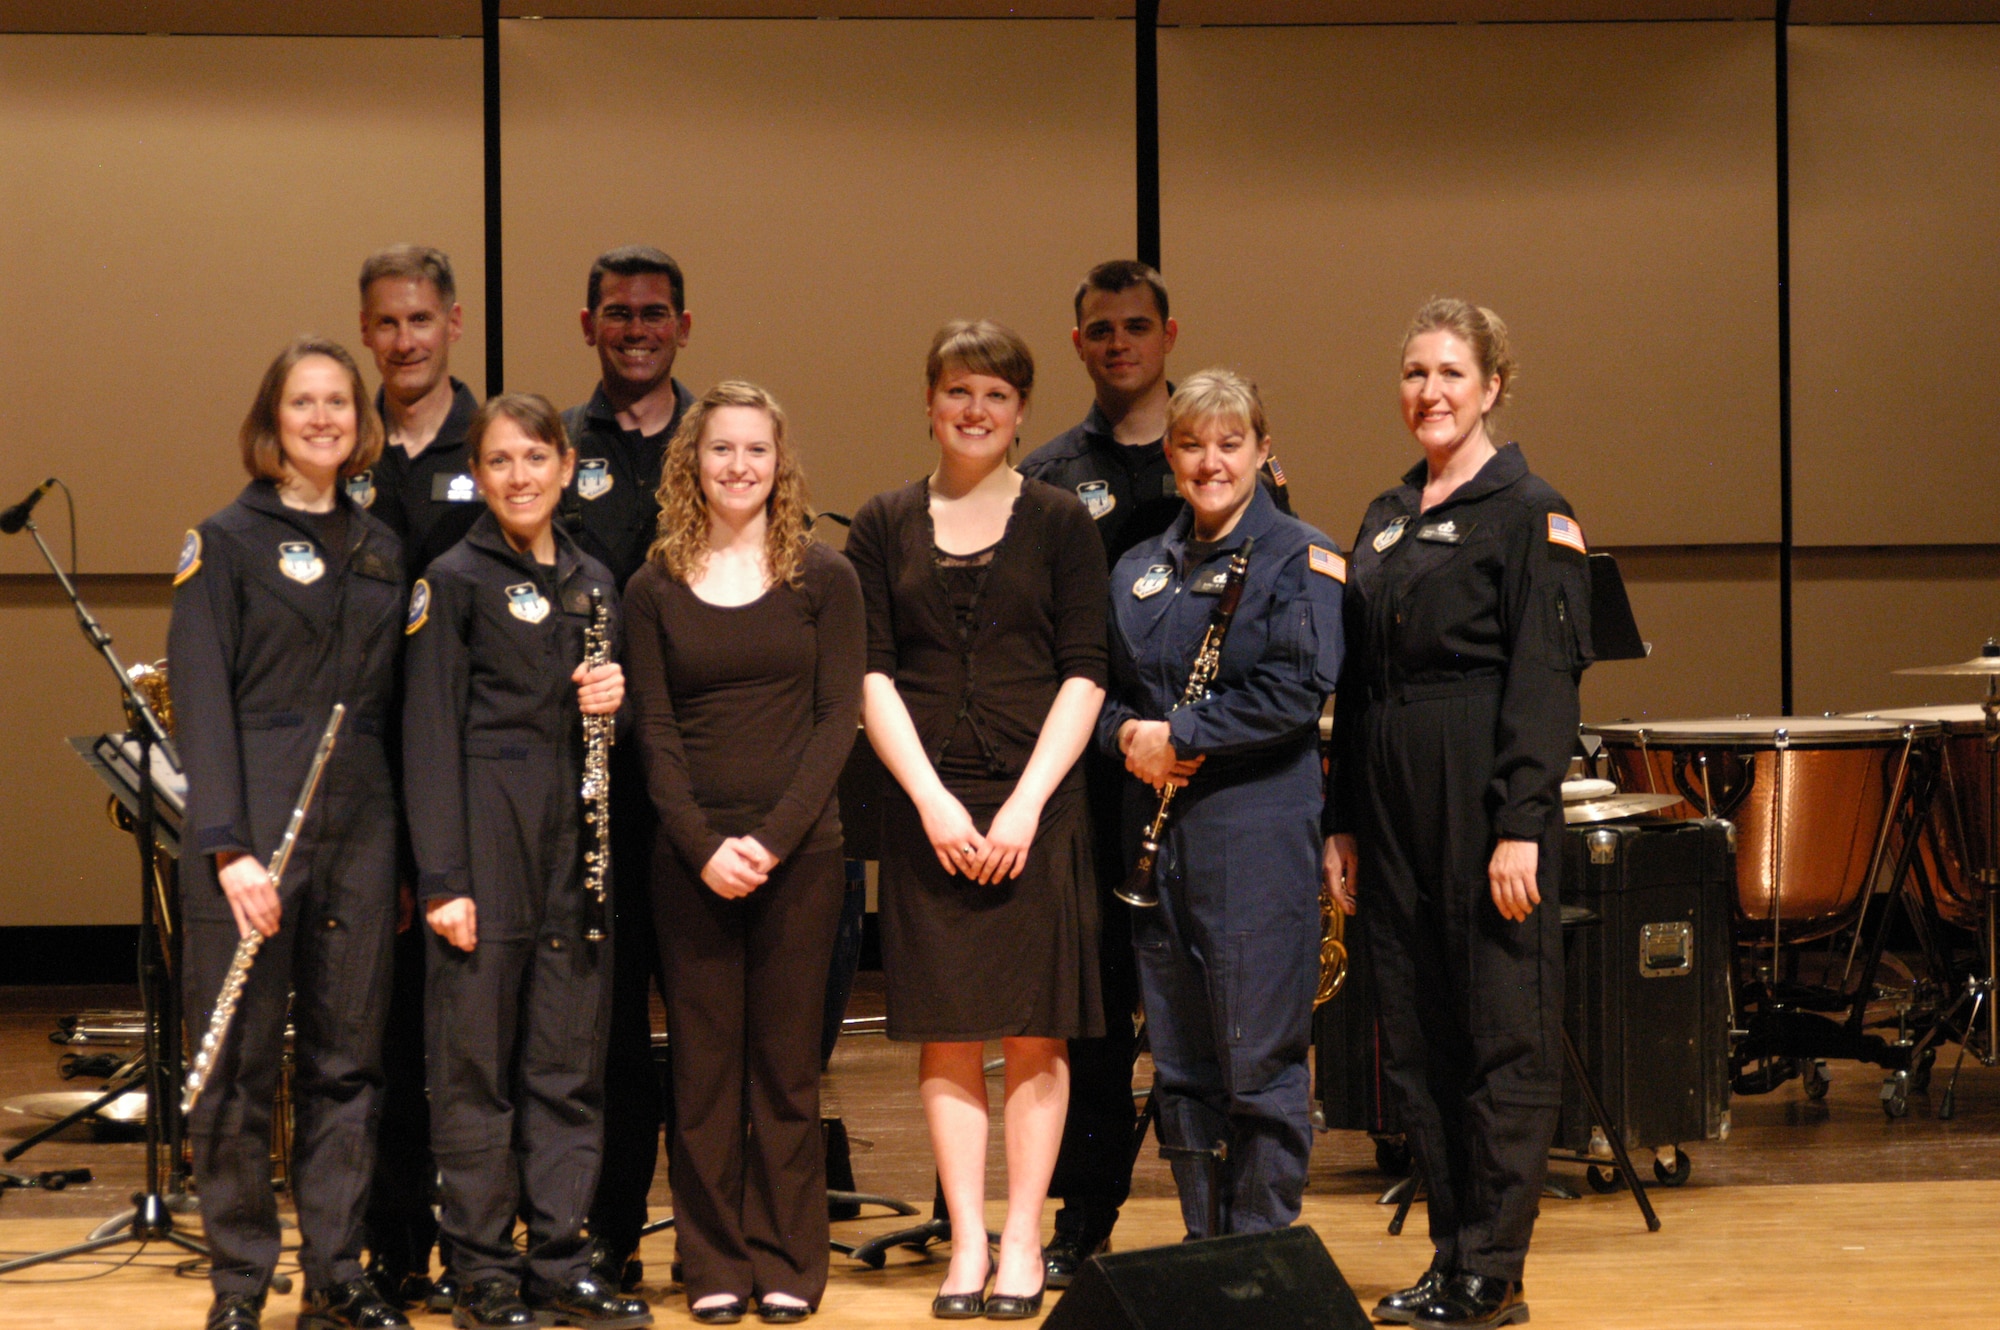 Academy Wiinds poses with student performers in Brainerd, Minnesota. These young musicians joined Academy Winds on stage for a performance of "Manhattan Beach March" by John Philip Sousa. Educational outreach is an important mission of the United States Air Force Academy Band, and Academy Winds shares decades of professional experience and knowledge to students around the country.
